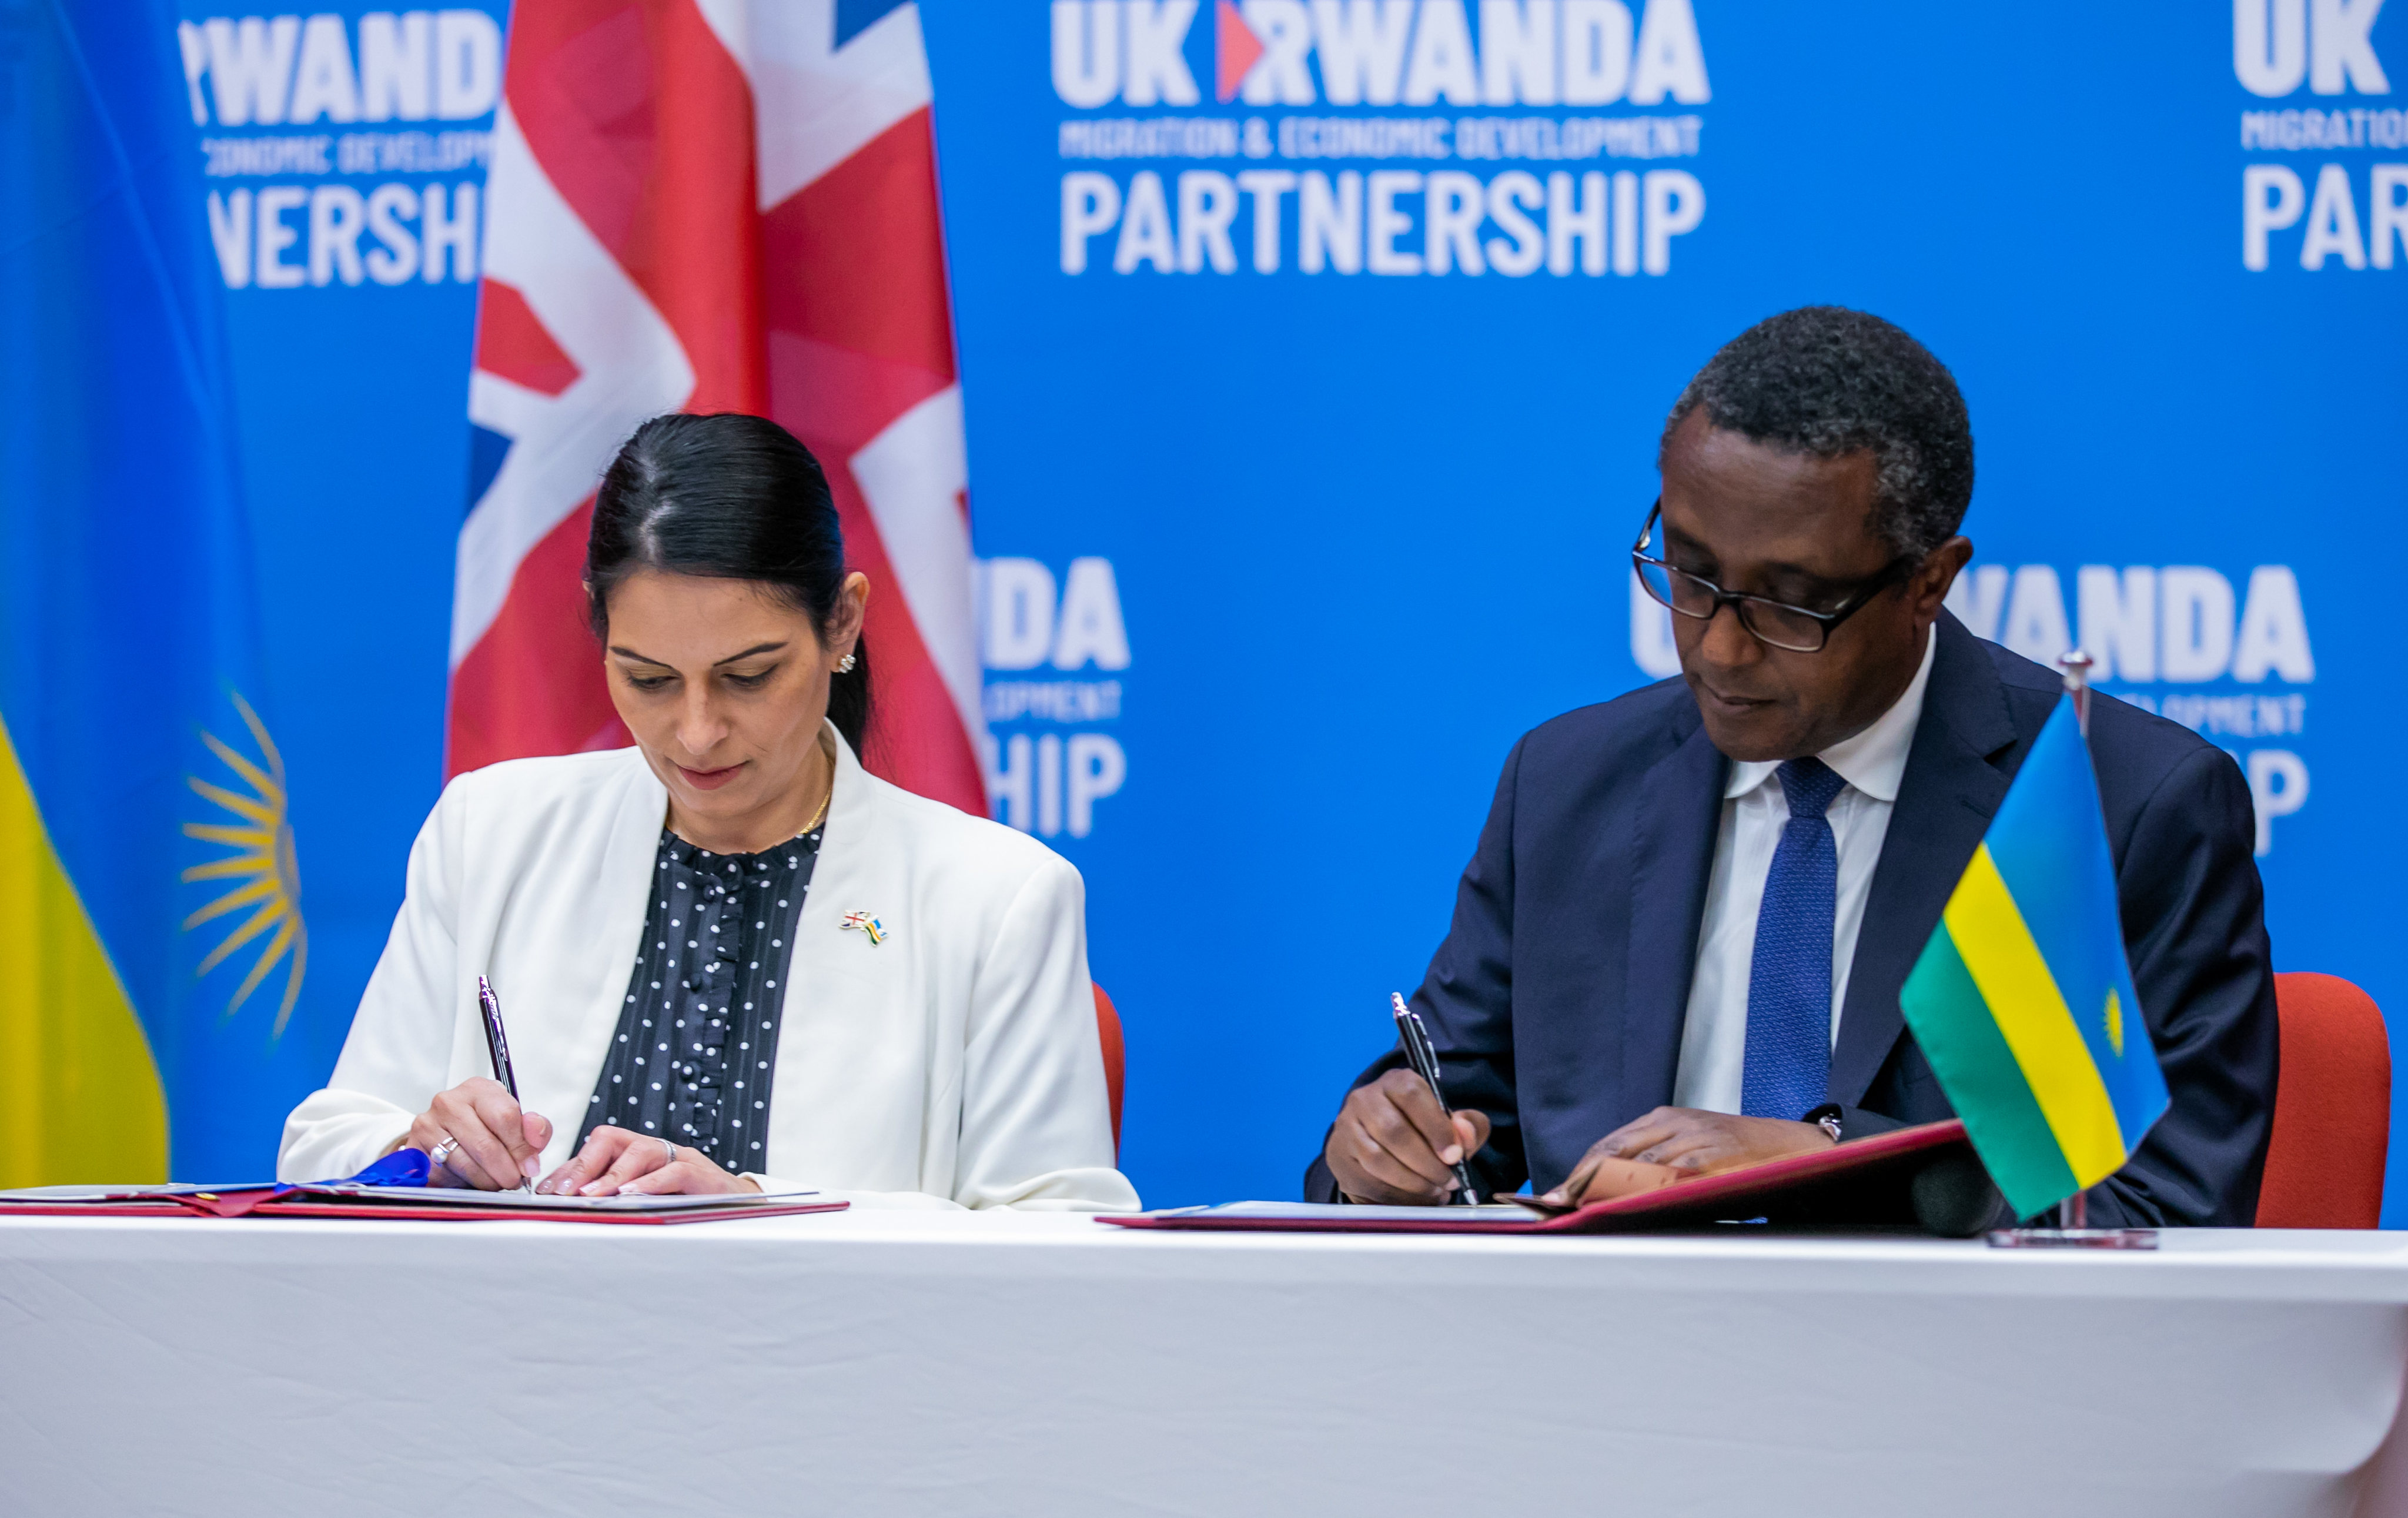 The Minister of Foreign Affairs and International Cooperation Dr. Vincent Biruta and Priti Patel  the Home Secretary of the United Kingdom sign the agreement in Kigali on April 14,2022. Photo by Olivier Mugwiza